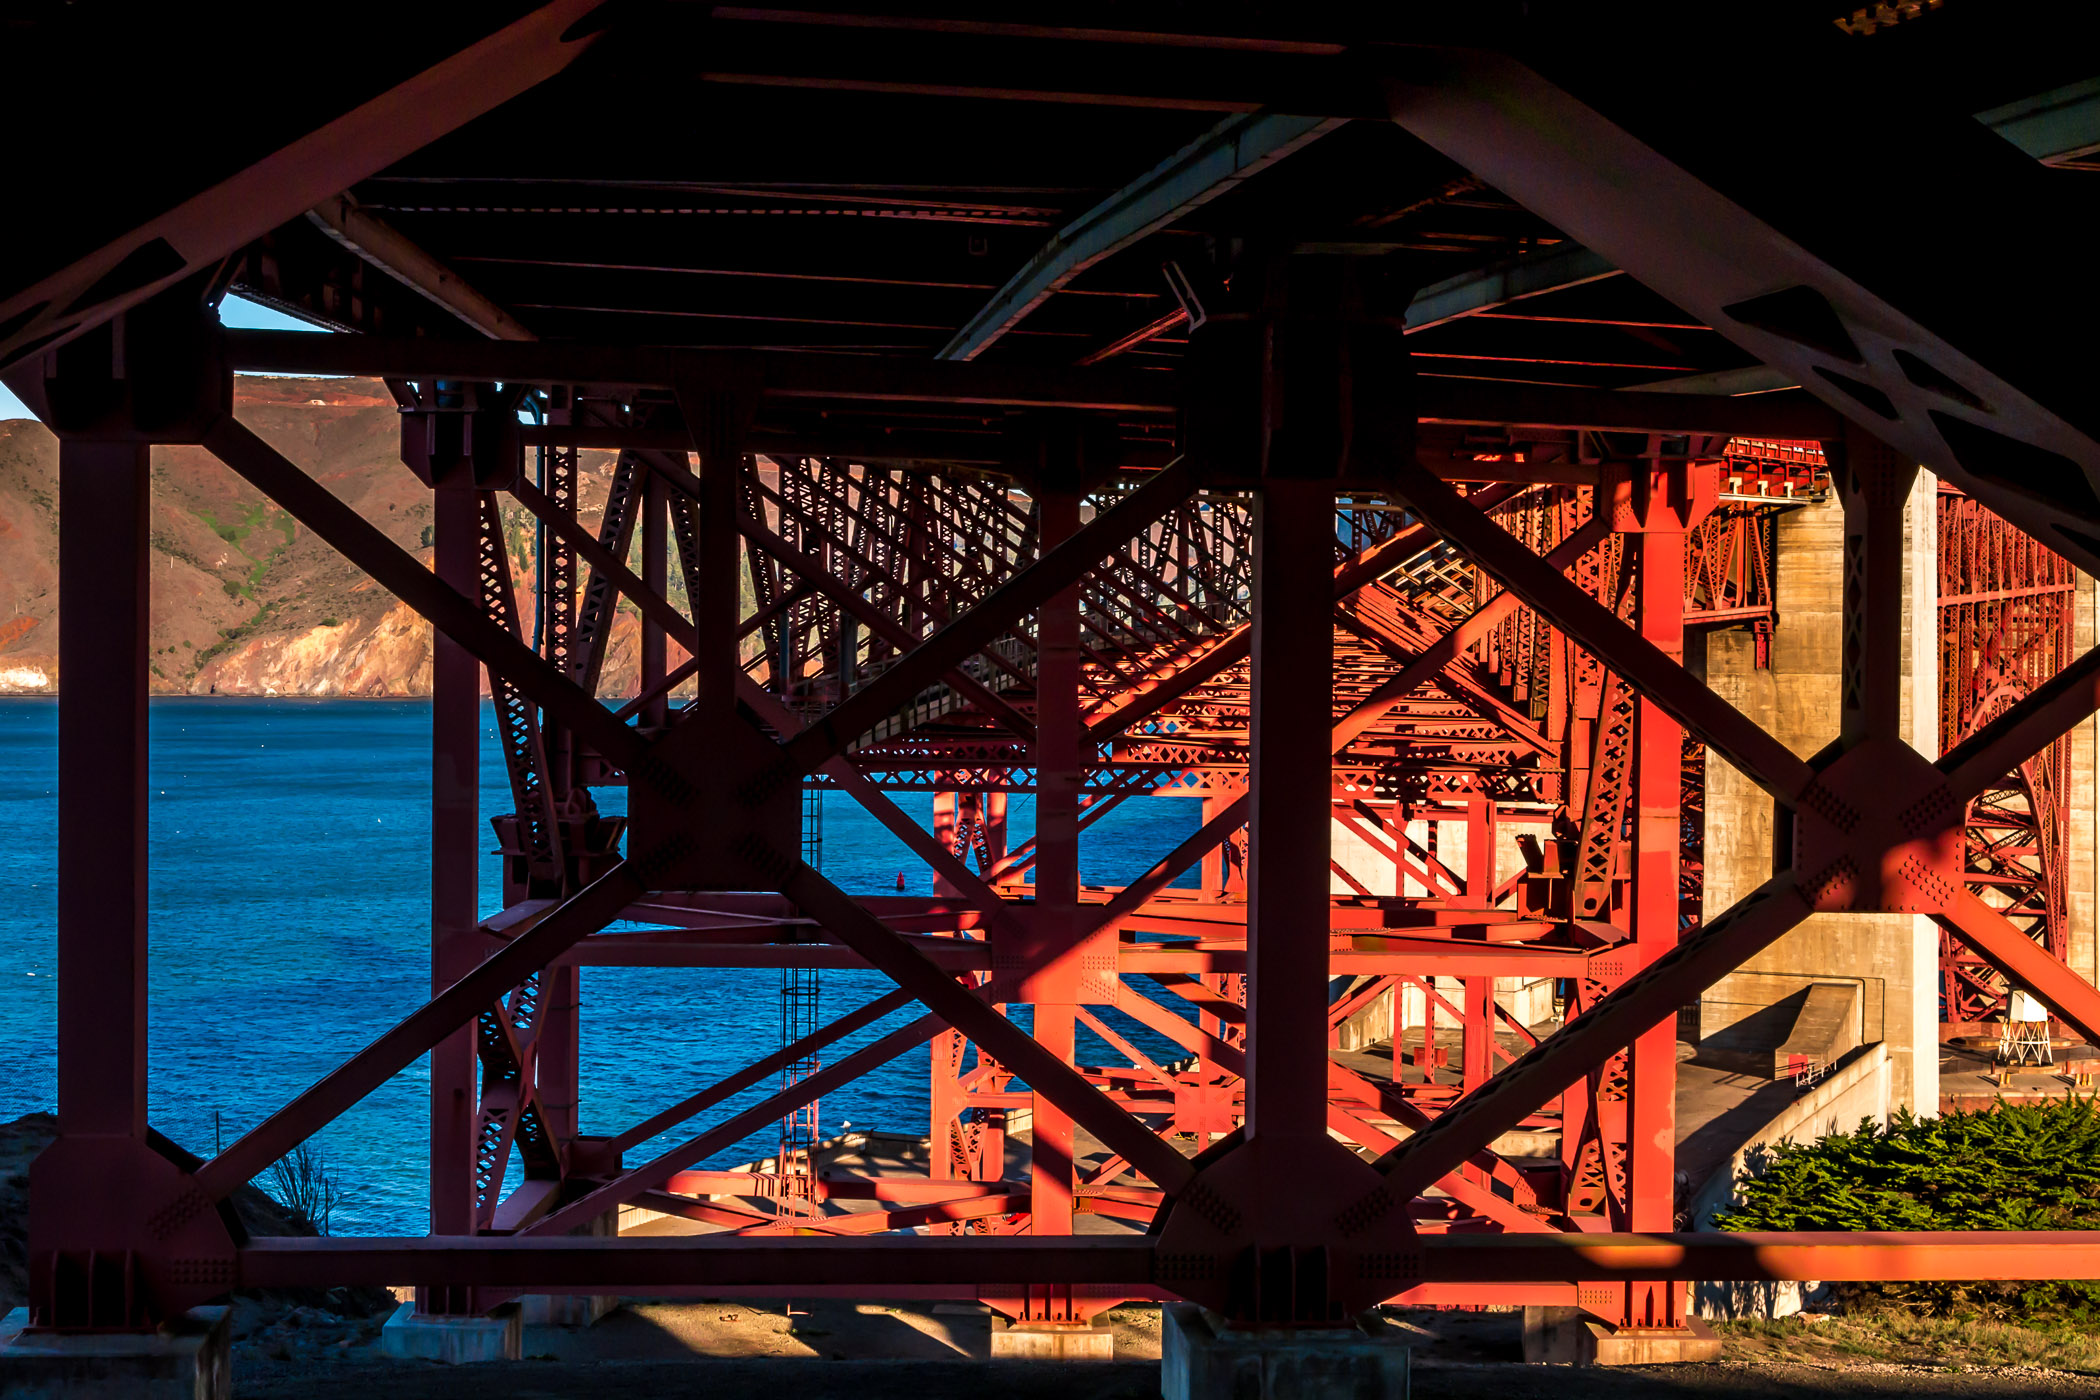 Detail of the support structure of San Francisco's iconic Golden Gate Bridge as it spans its namesake narrows between San Francisco Bay and the Pacific Ocean.